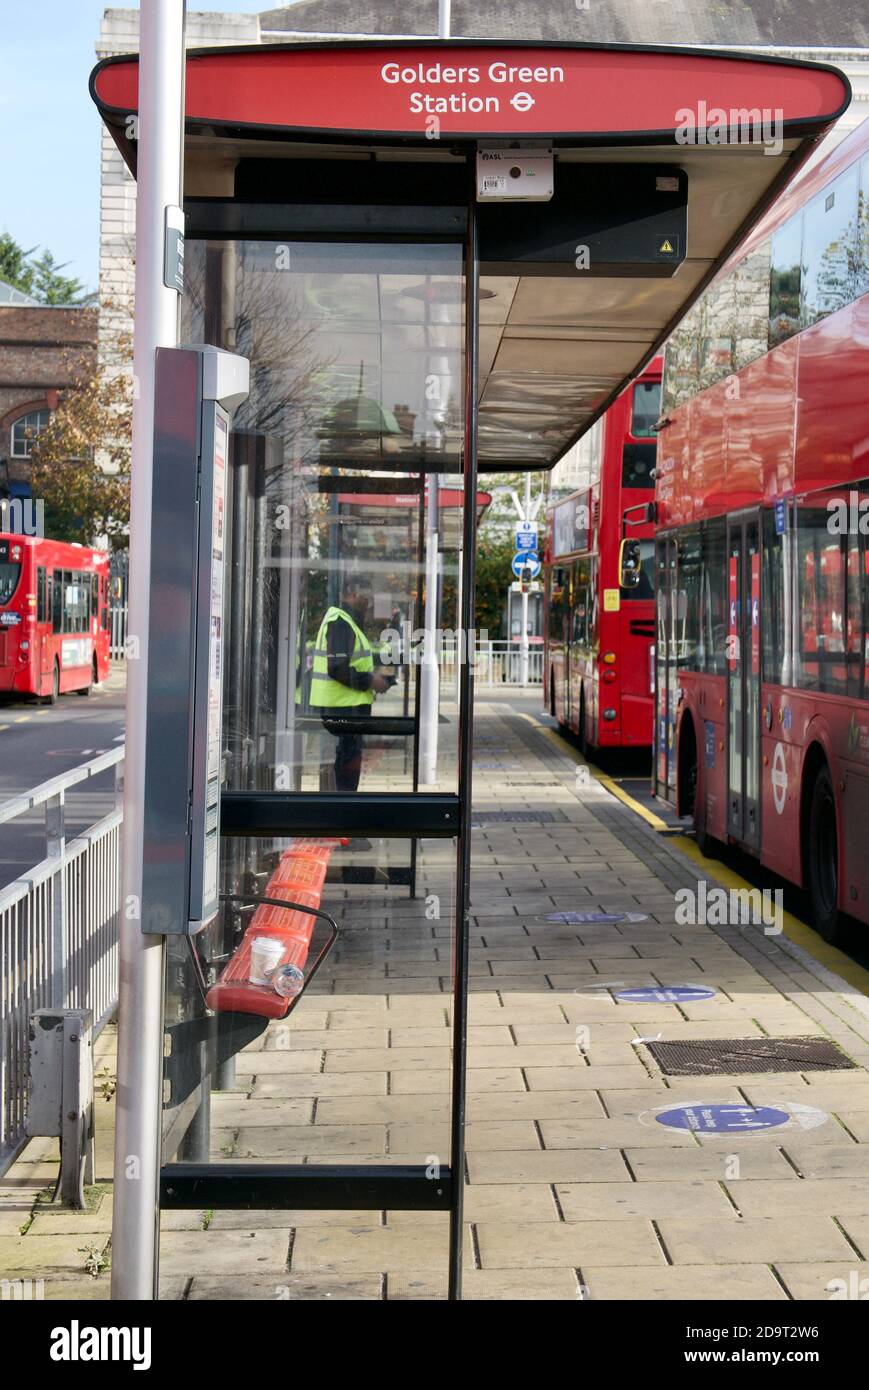 First weekend of the second national lockdown in UK. Empty London red buses and bus station in Golders Green, London on Saturday 7th November. Stock Photo